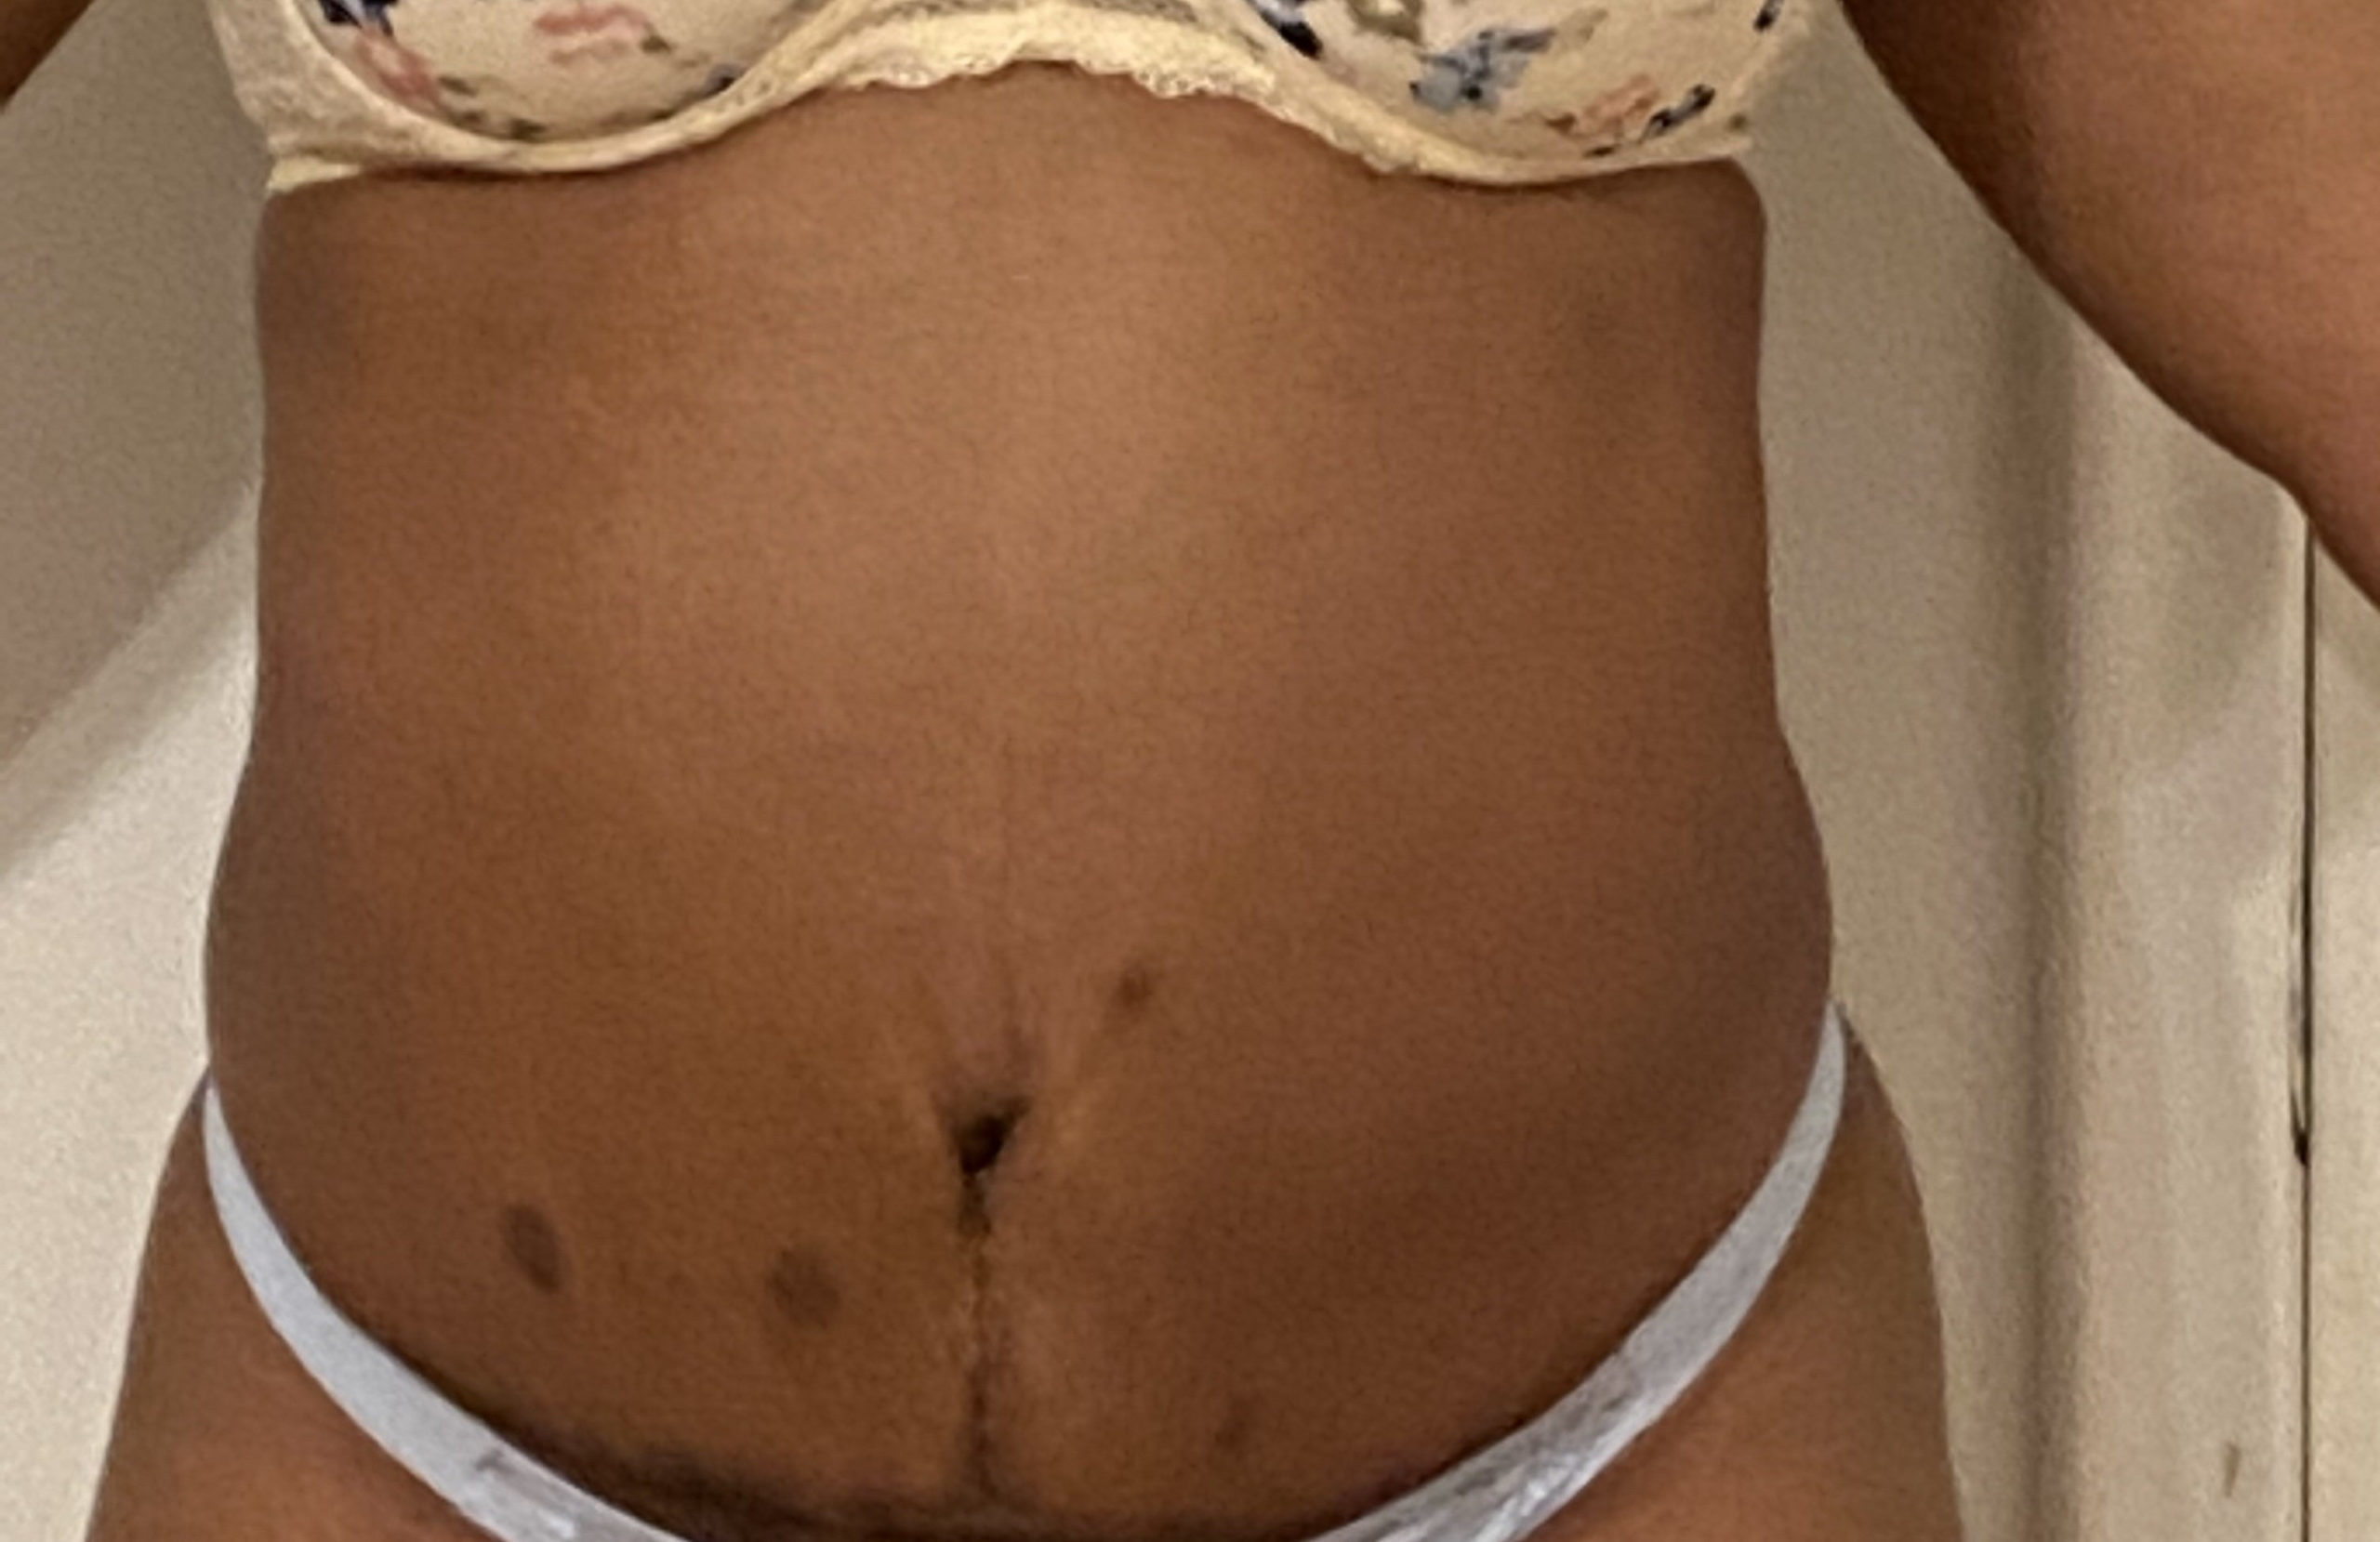 43 year old female tummy tuck front view after 10 months post op